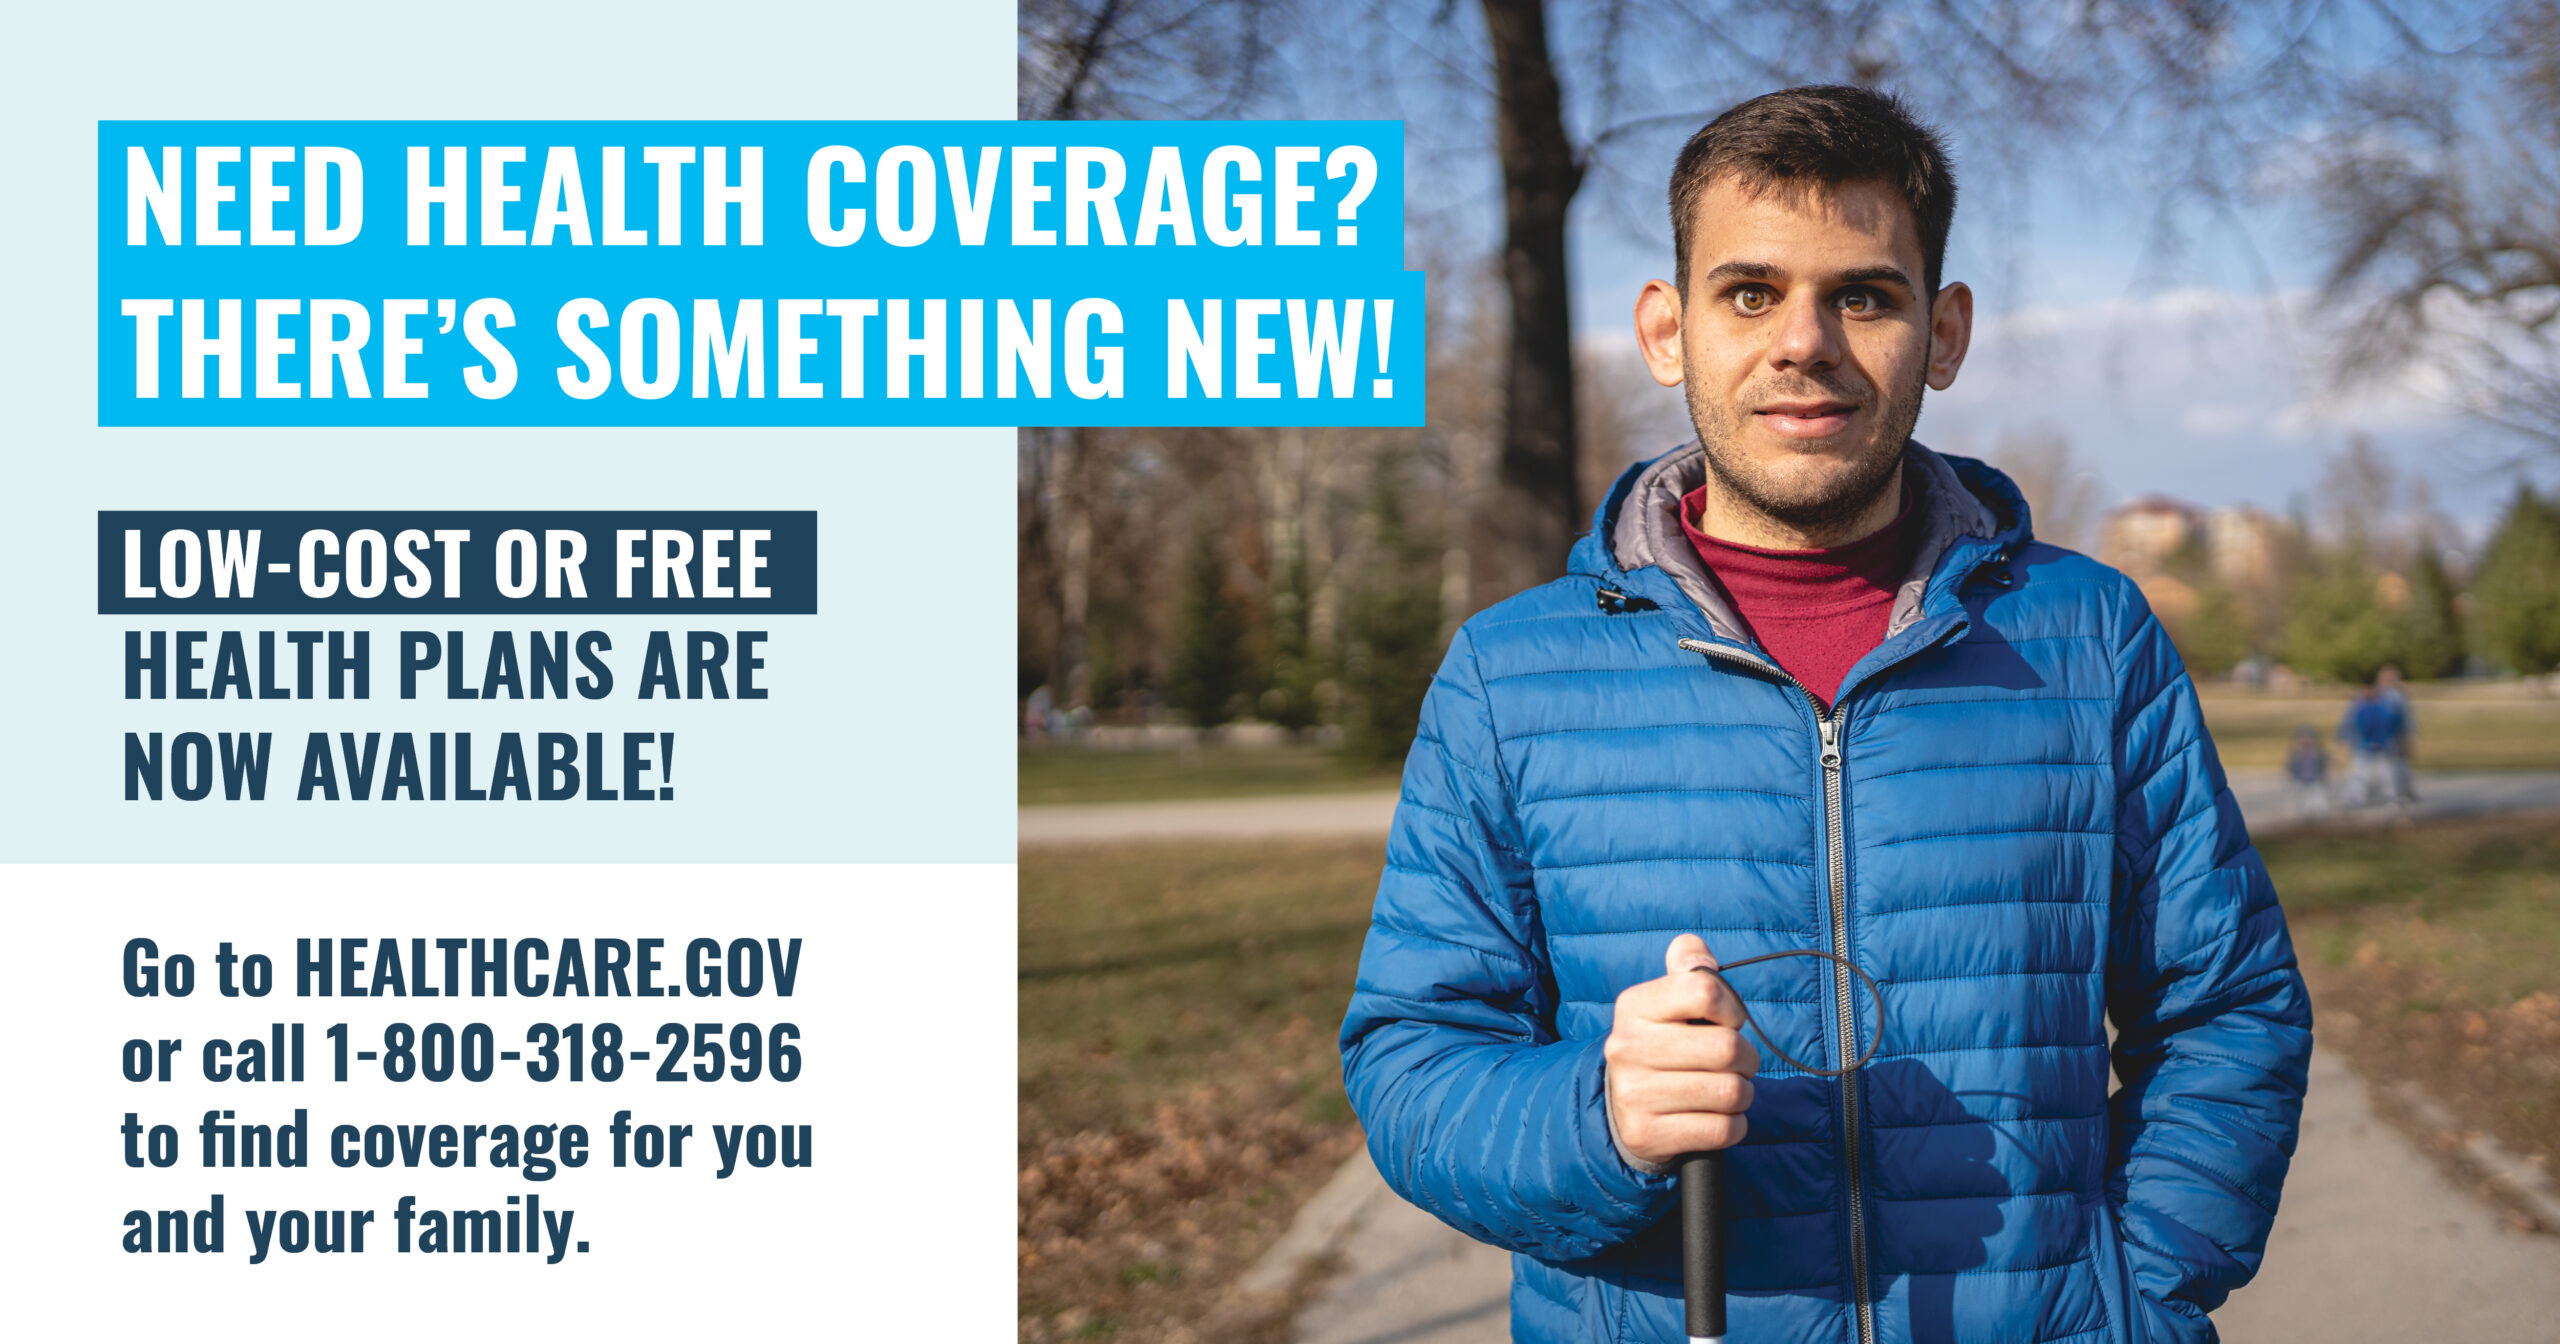 Photo of a man holding a guide cane with the message “Need health care coverage? There’s something new! Low-cost or free health plans are now available! Go to healthcare.gov or call 1-800-318-2596 to find coverage for you and your family.